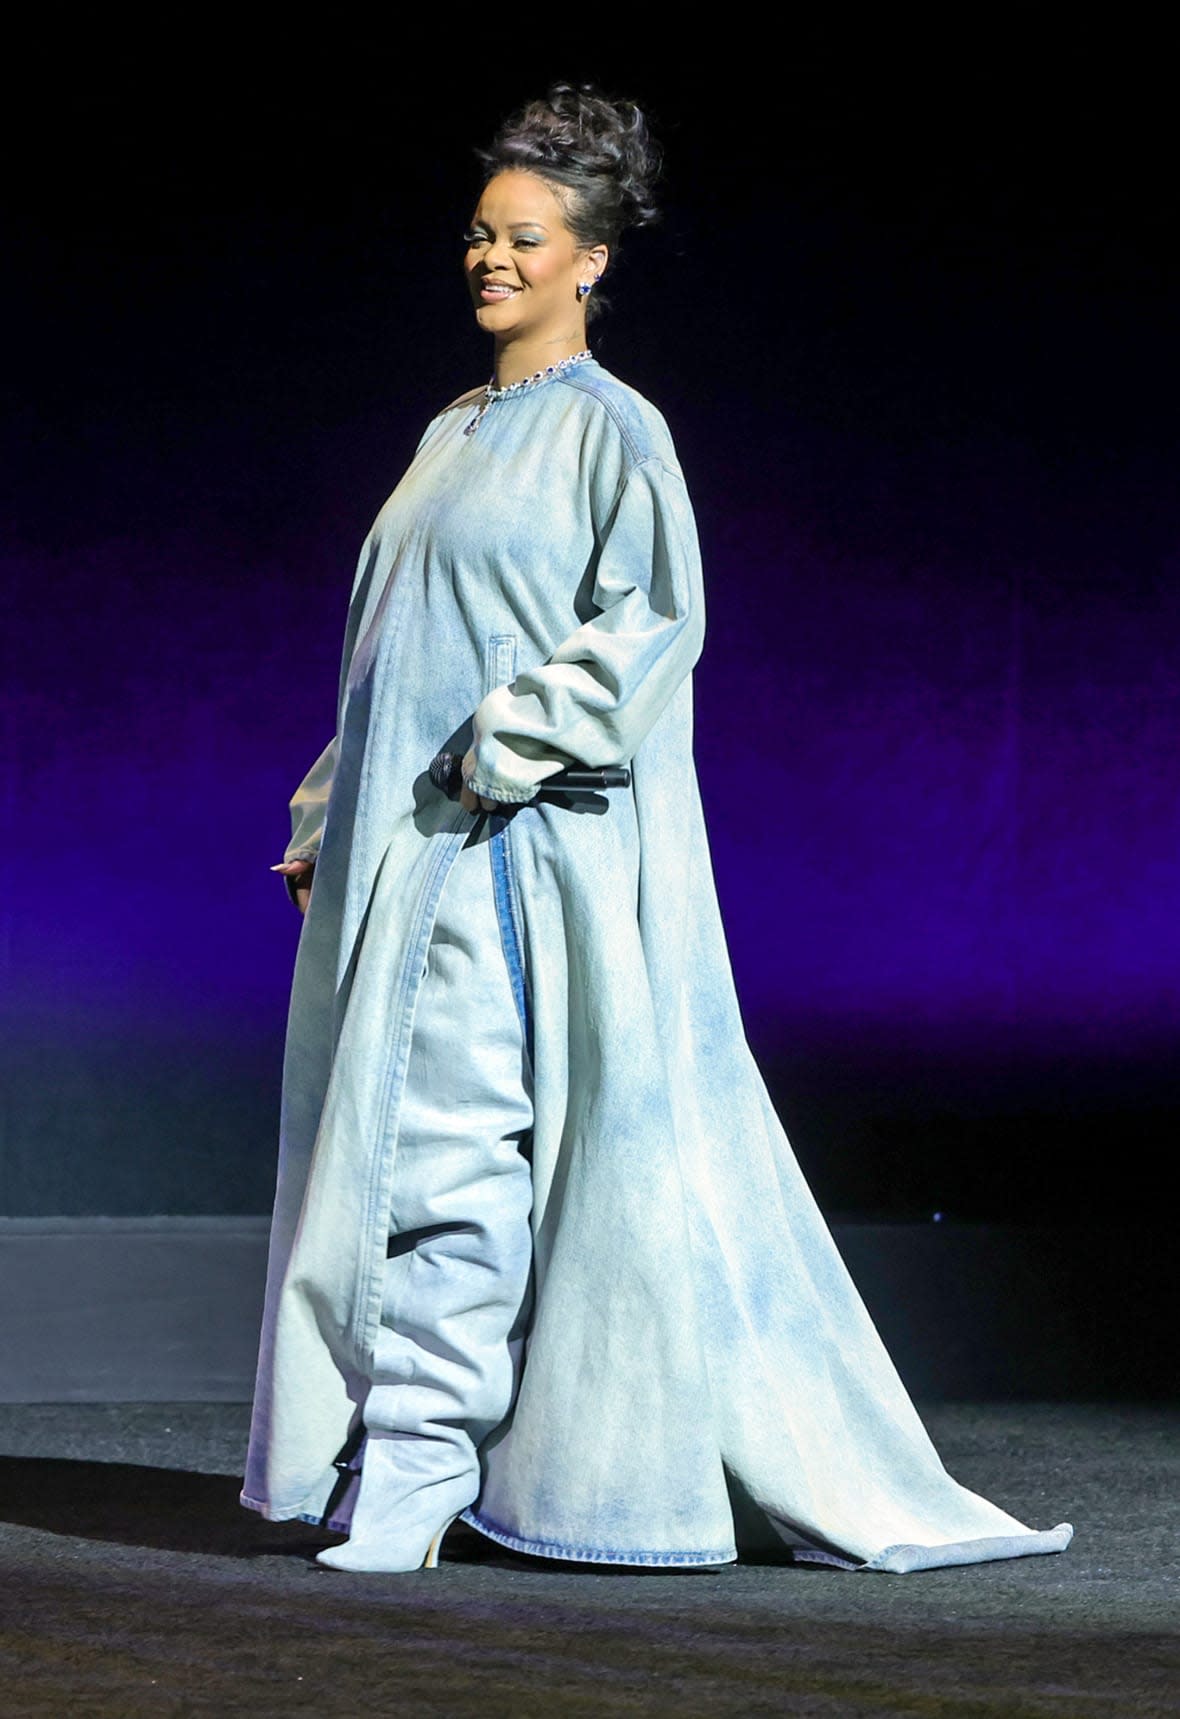 Rihanna walks onstage as she promotes the upcoming film “The Smurfs Movie” during the Paramount Pictures presentation during CinemaCon, the official convention of the National Association of Theatre Owners, at The Colosseum at Caesars Palace on April 27, 2023 in Las Vegas, Nevada. (Photo by Ethan Miller/Getty Images)